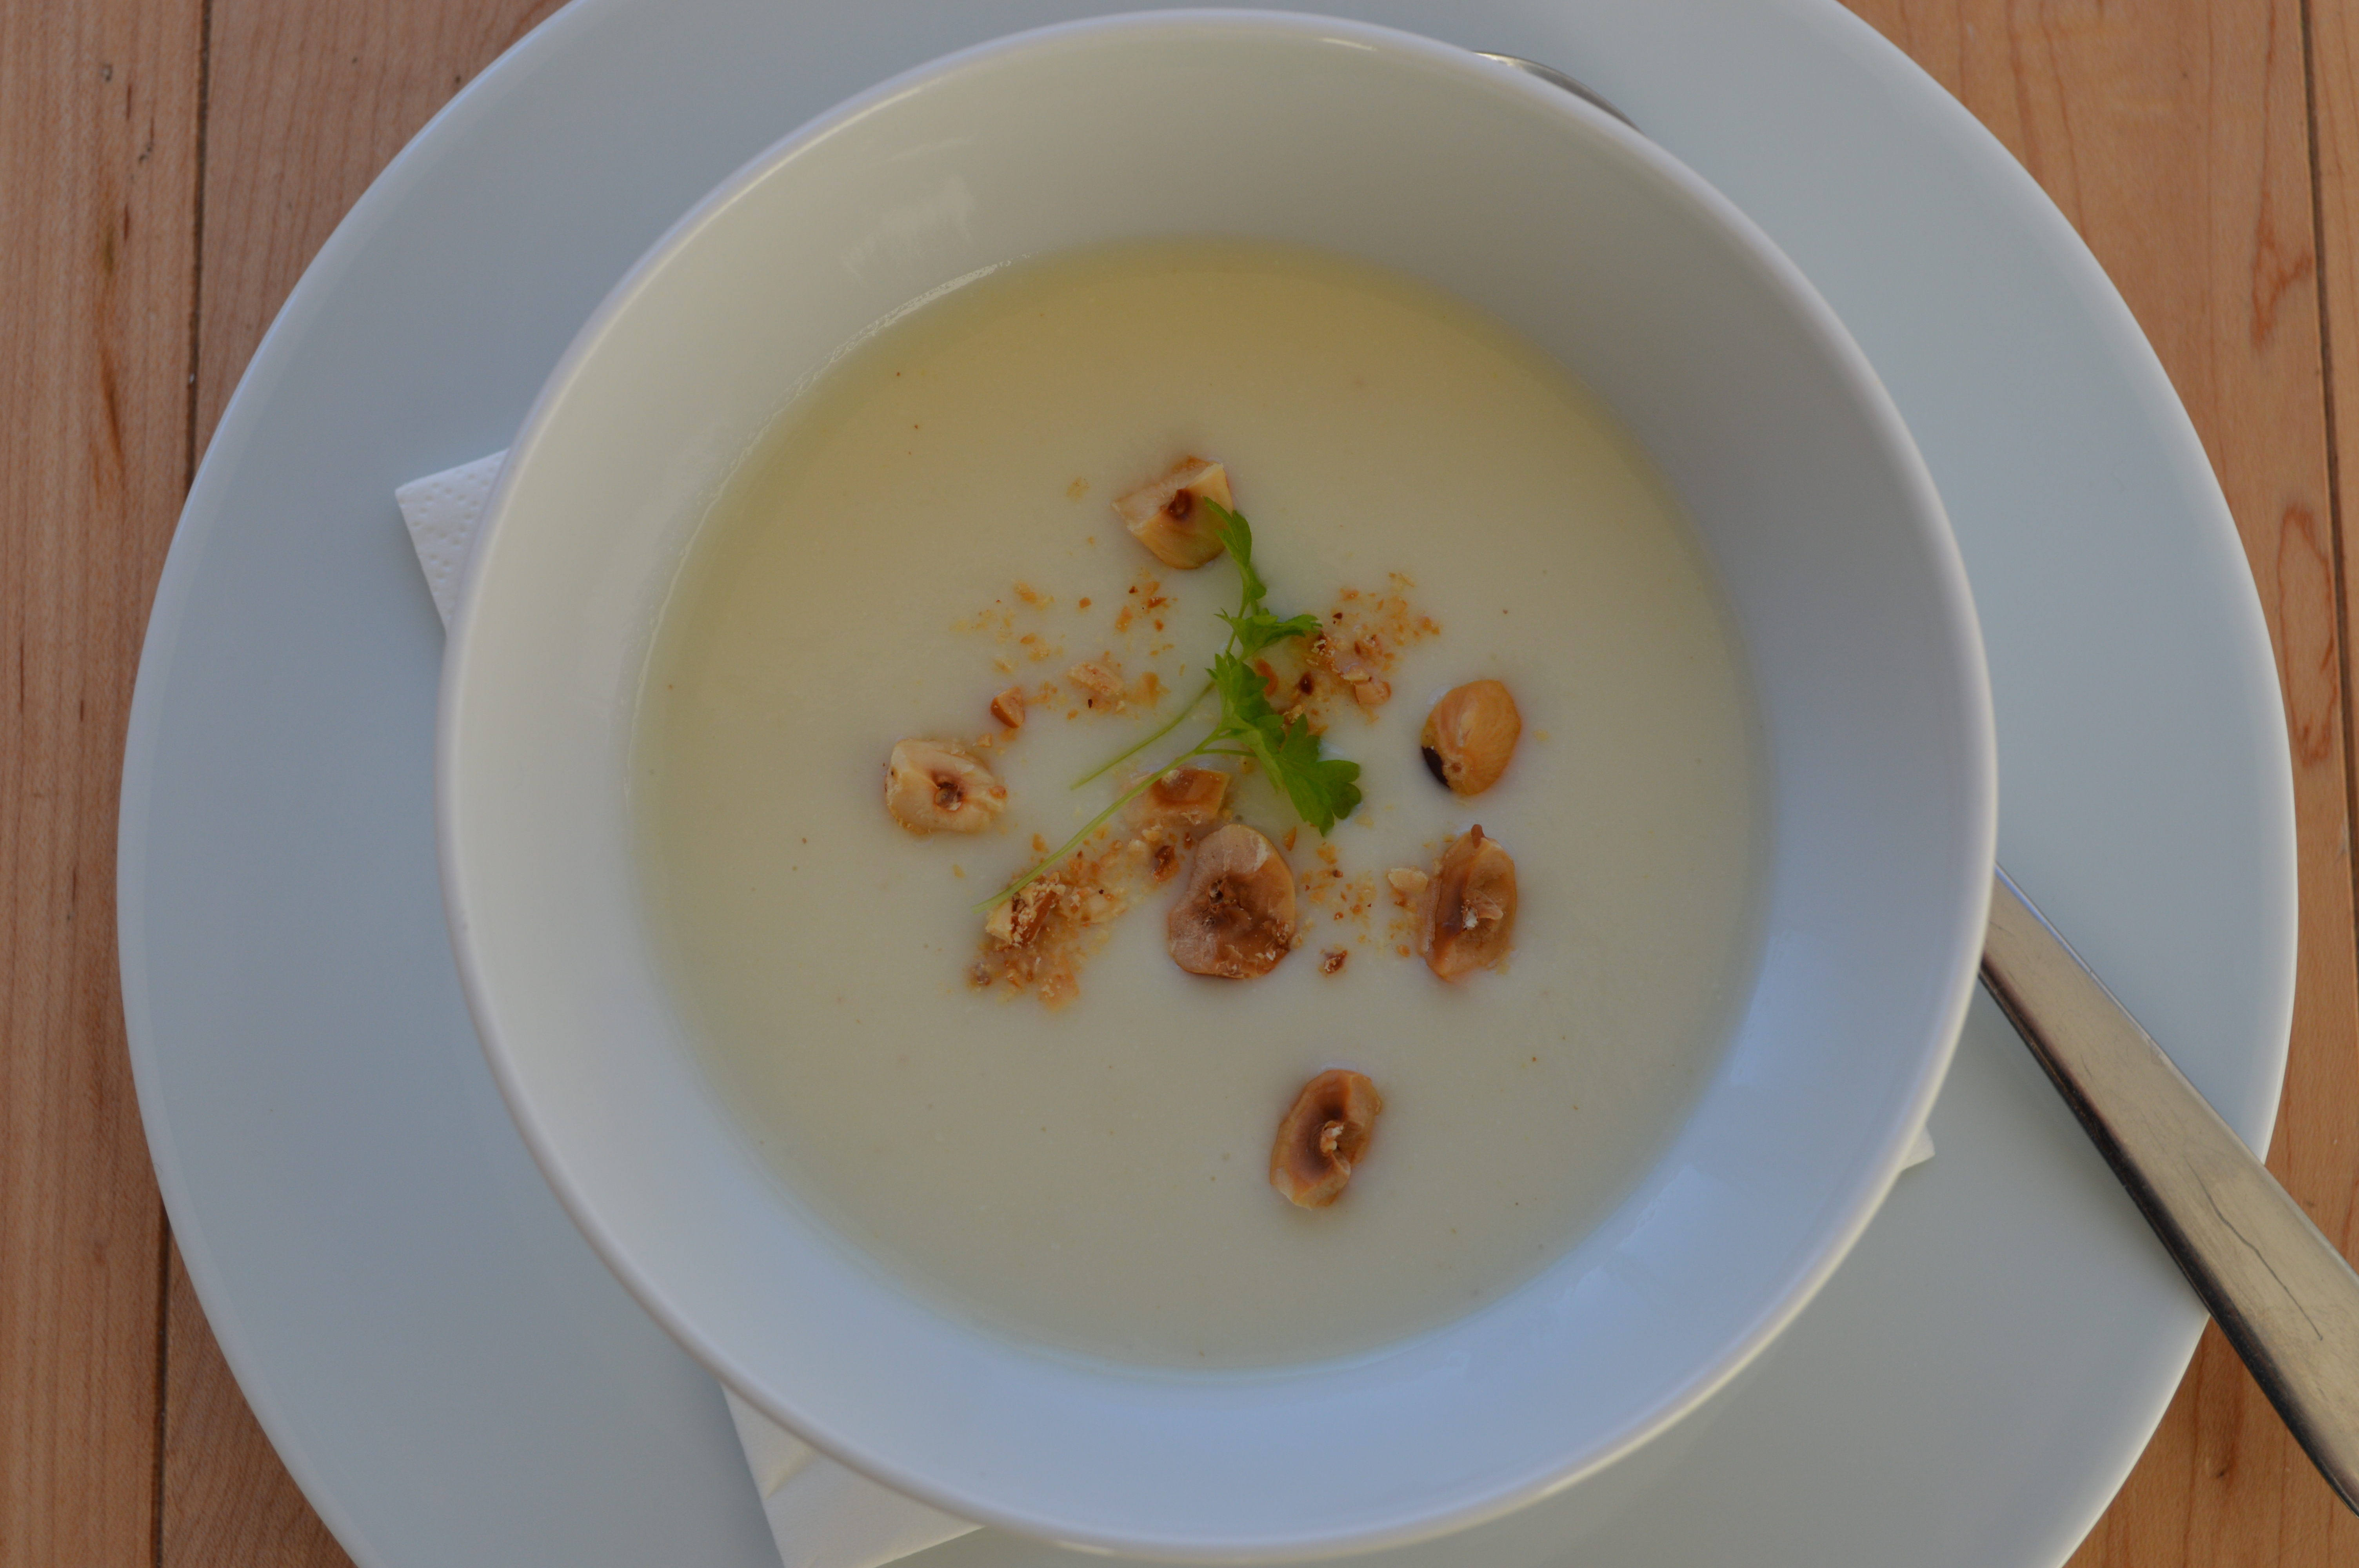 Bowl of parsnip and pear soup, garnished with toasted hazelnuts and chervil